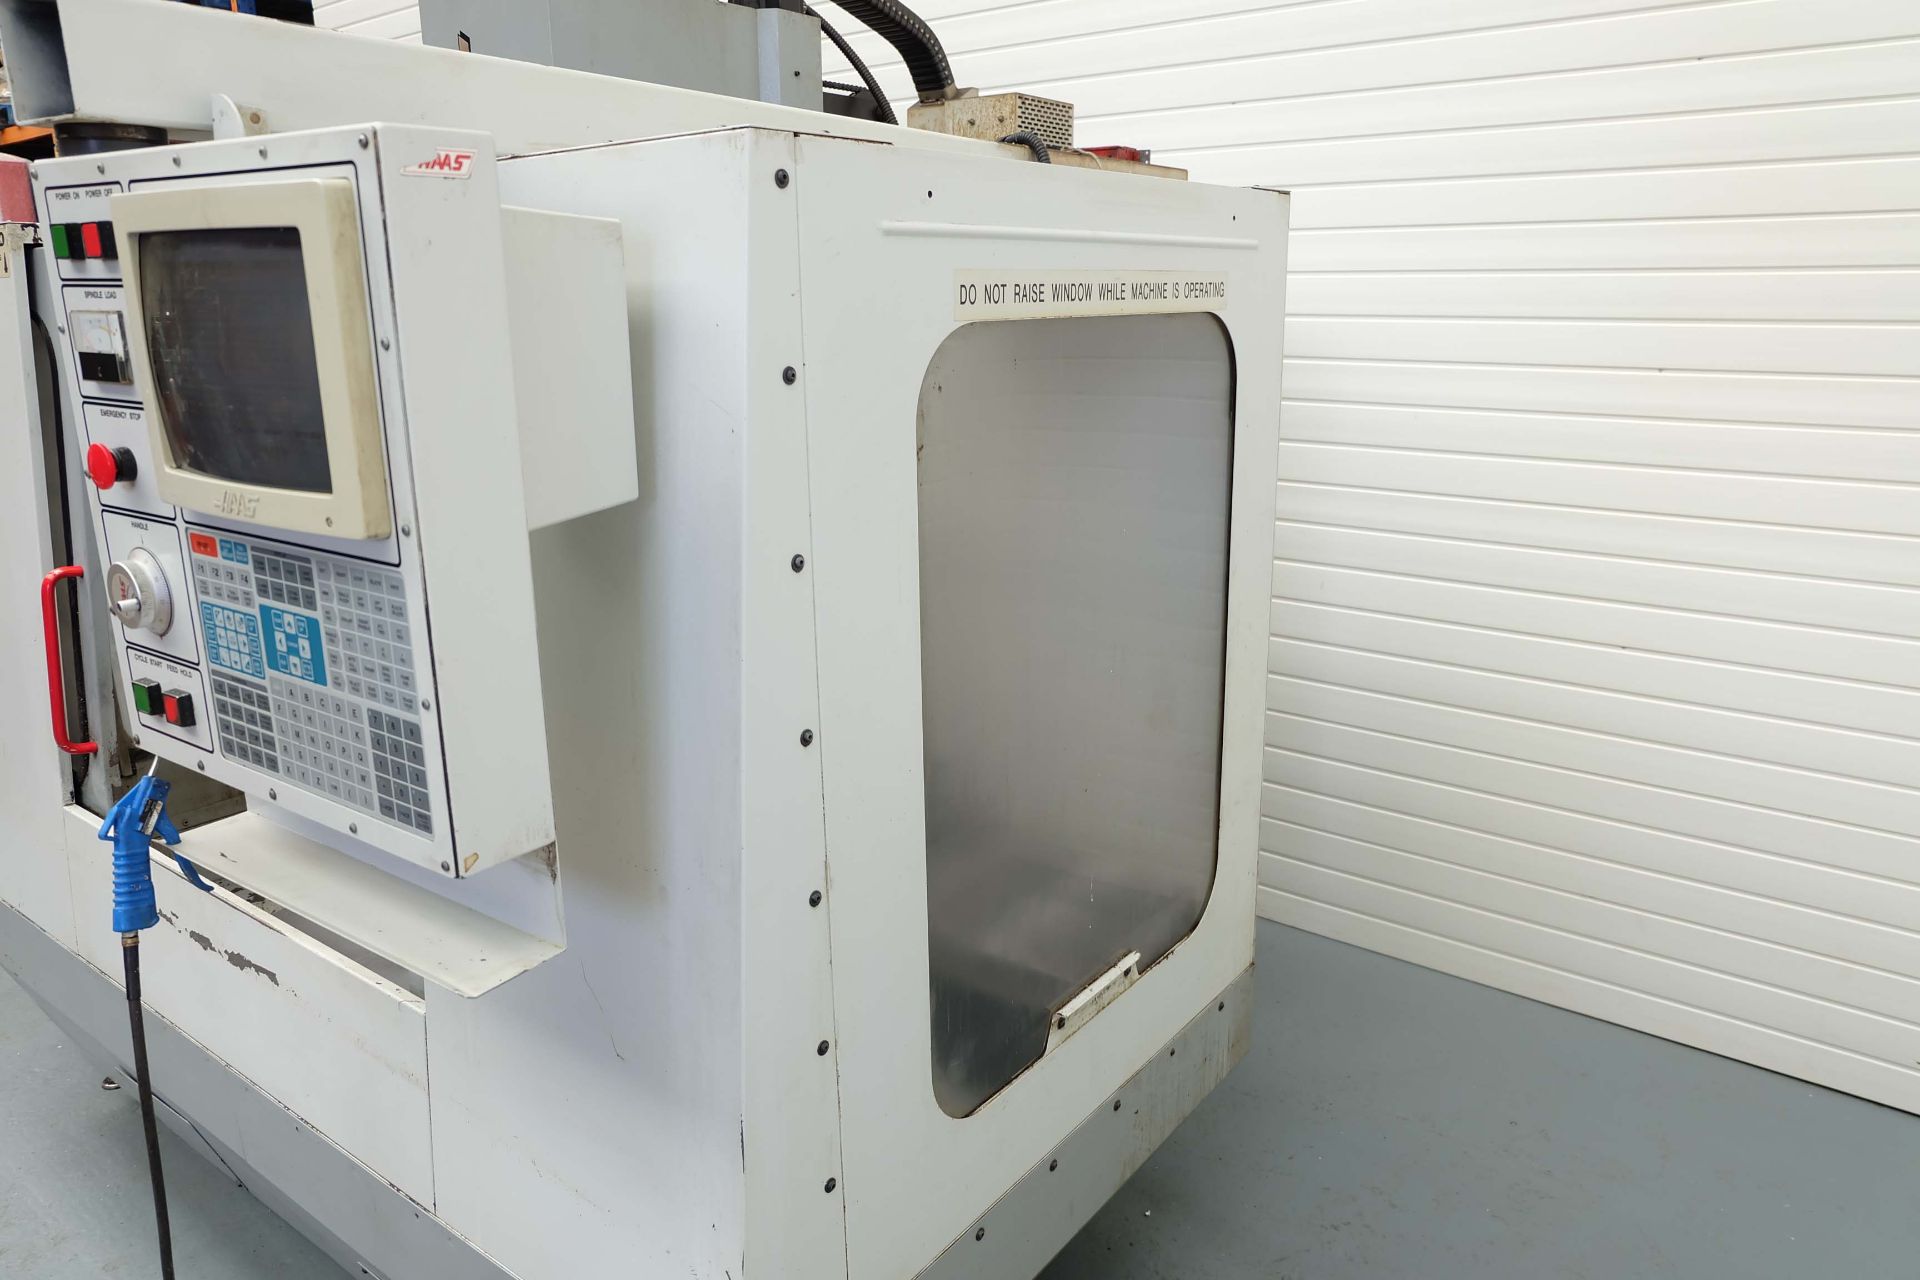 HAAS Model 2 Three Axis Vertical Maching Centre With 20 Station Auto Tool Changer. - Image 10 of 12